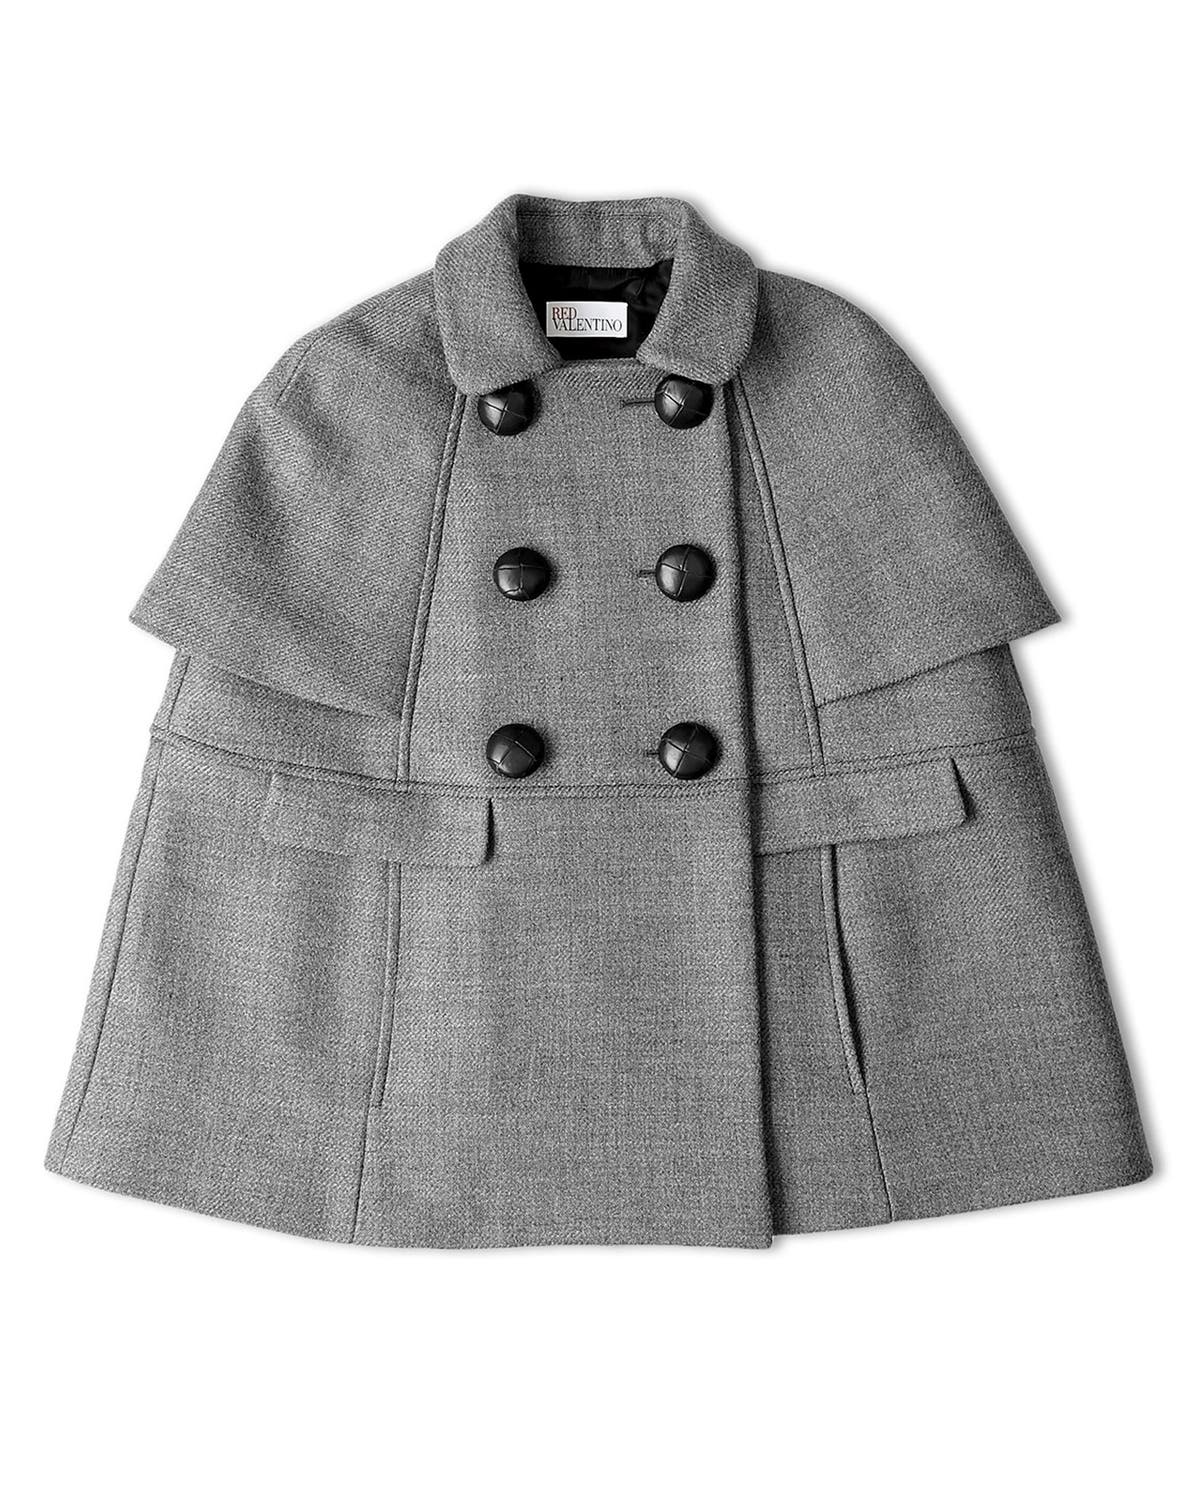 How to get the look: Cape coats | The Independent | The Independent